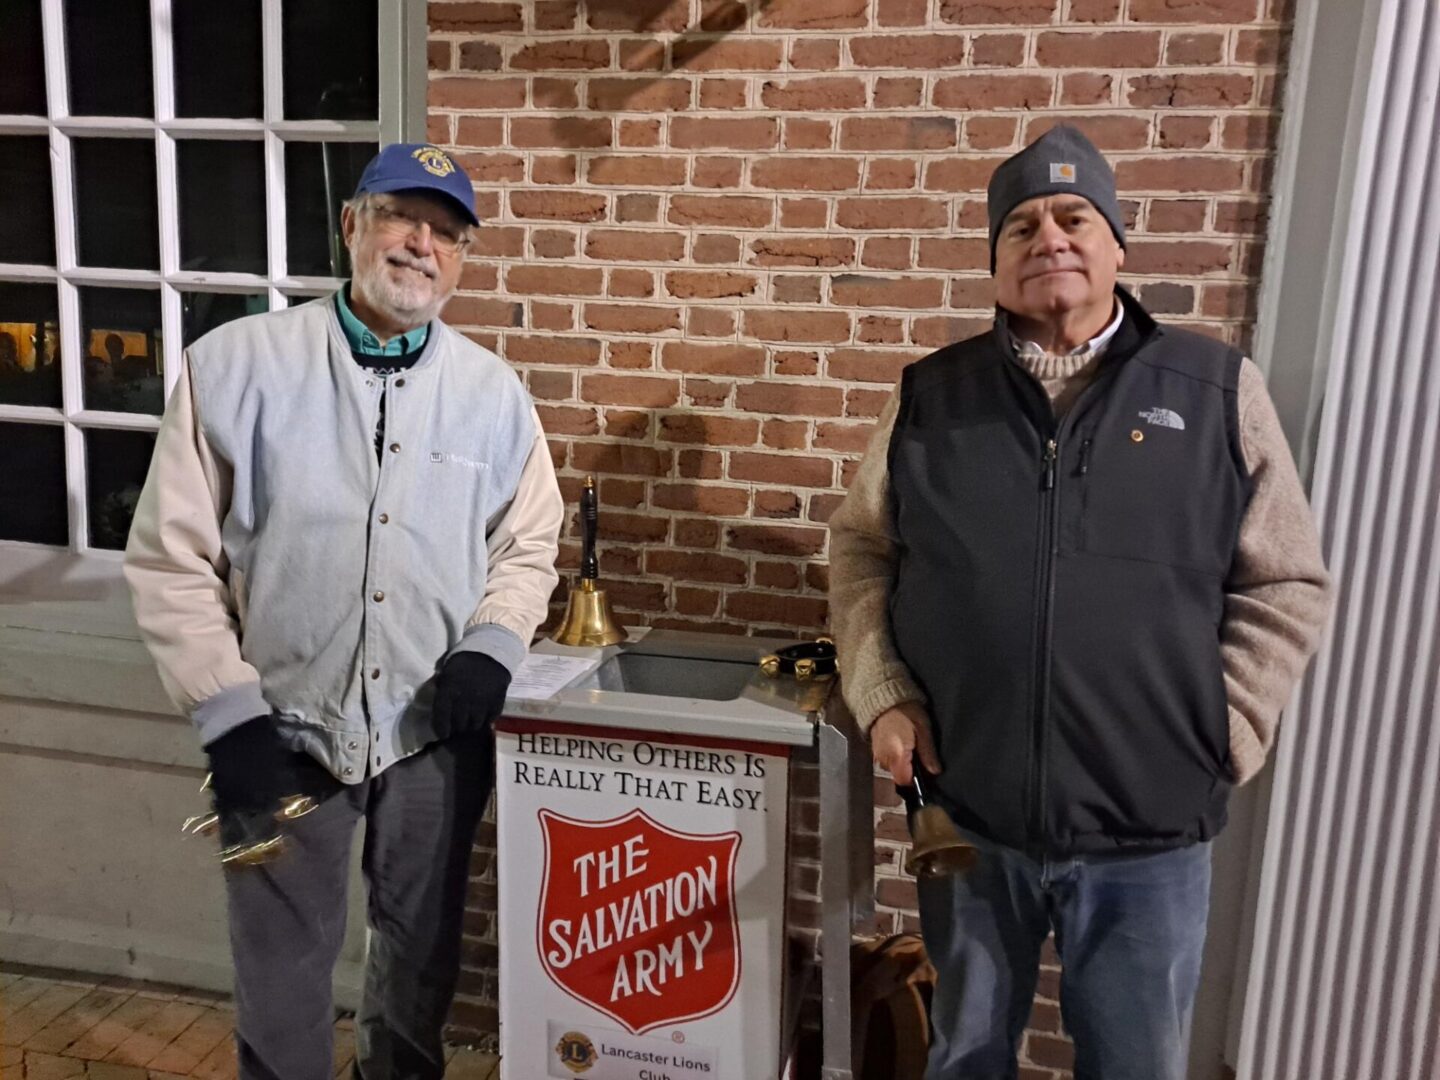 Two Men Standing With a Salvation Army Stand